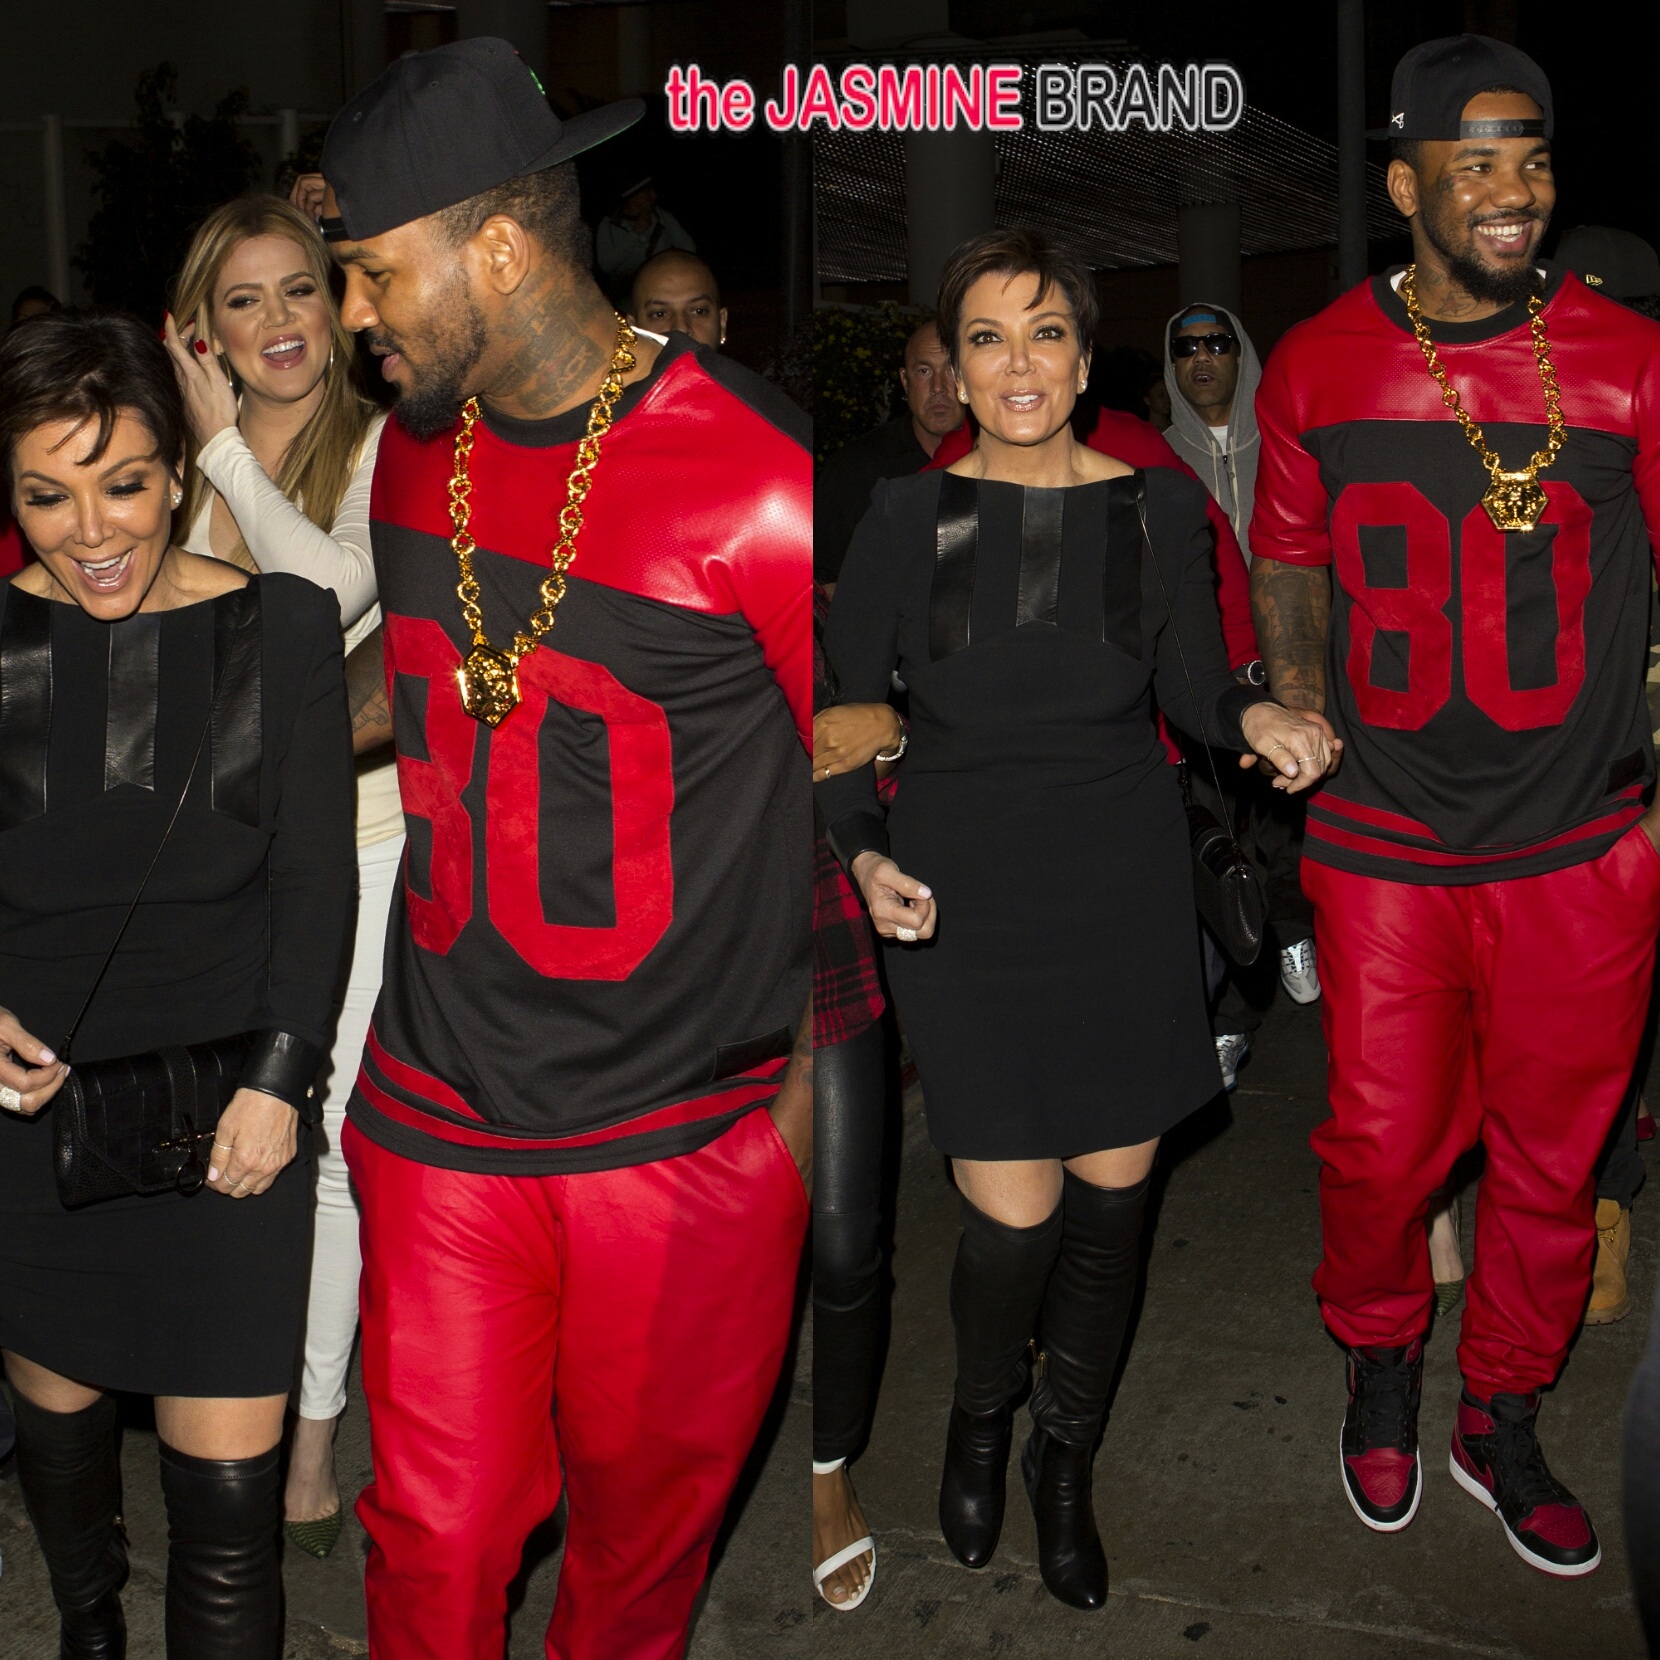 kris-jenner-parties-with-khloe-kardashian-and-the-game-tru-hollywood-the-jasmine-brand.jpg